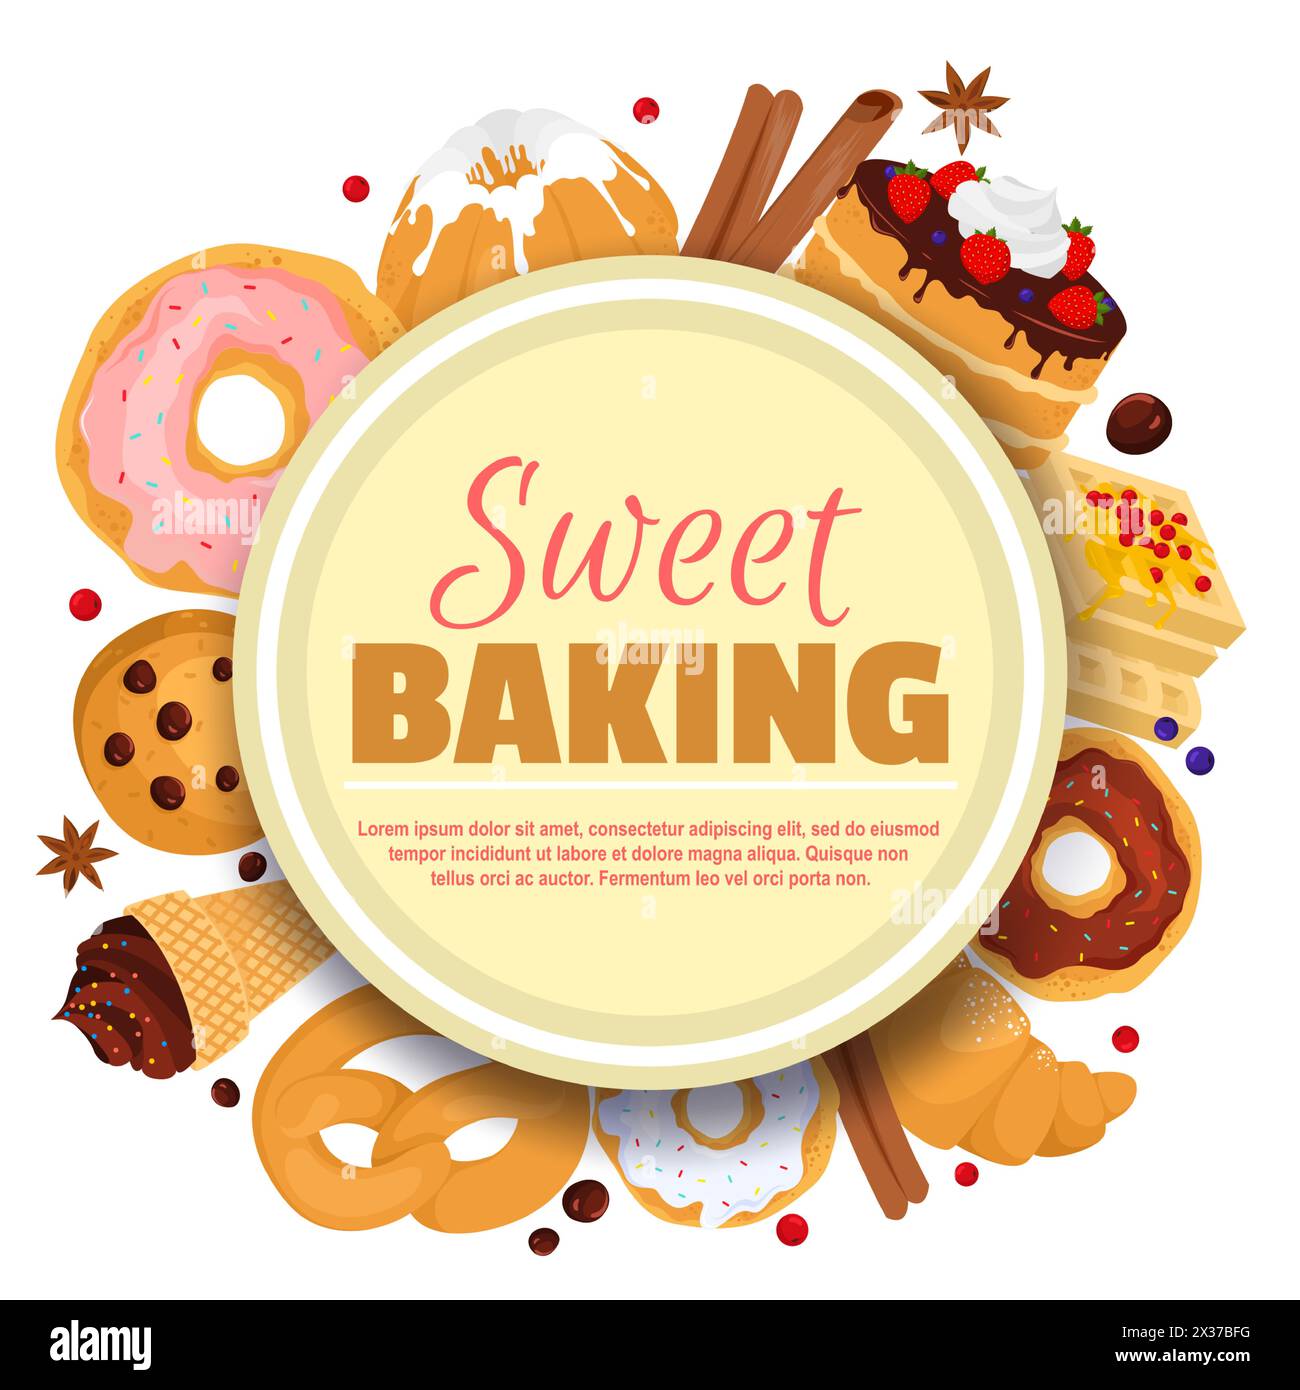 Sweet baking round frame poster template with tasty desserts design. Coffee shop, bakery house or confectionary store banner vector illustration Stock Vector